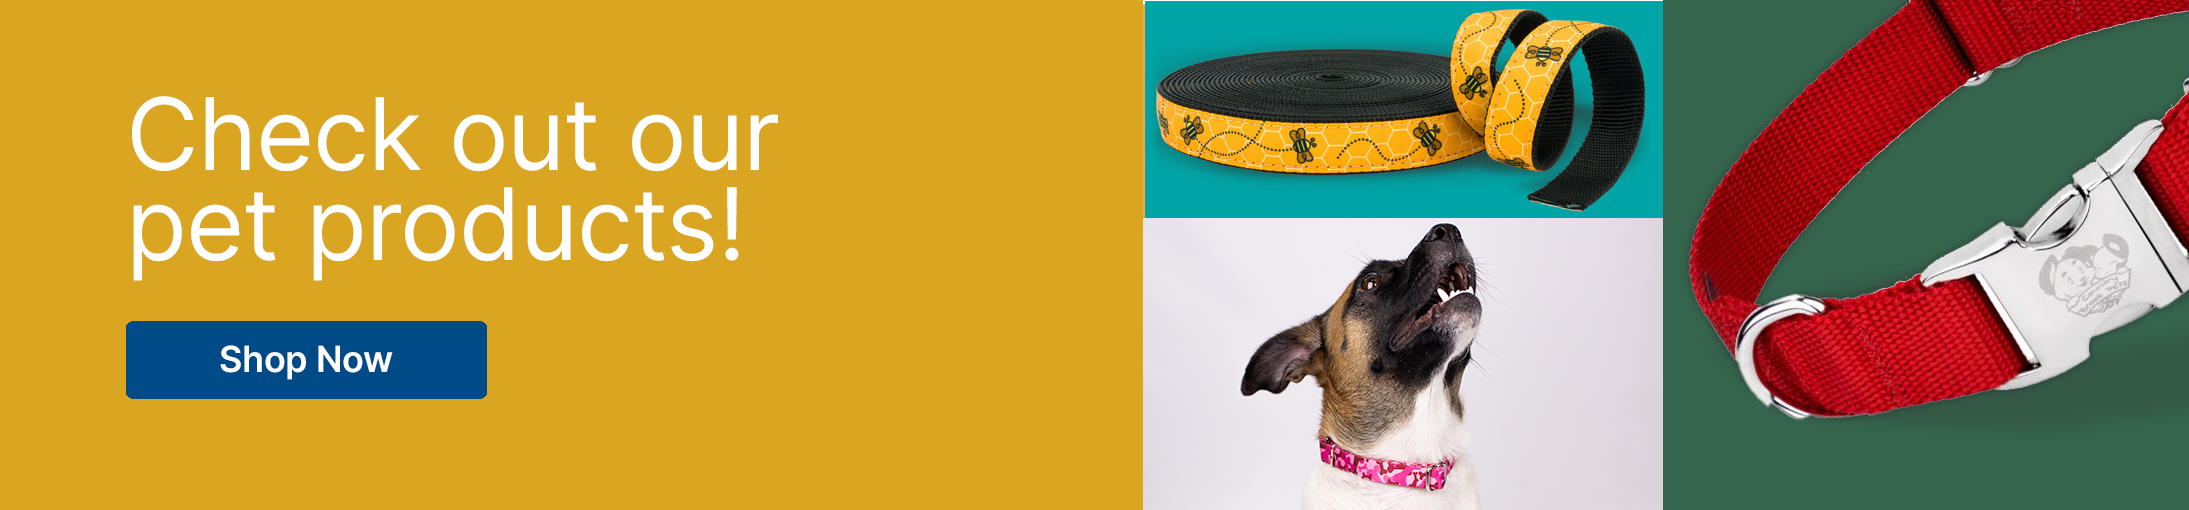 Check out our pet products title with a collage of images showing a dog, a red dog collar and a featured nylon webbing with a bee pattern design